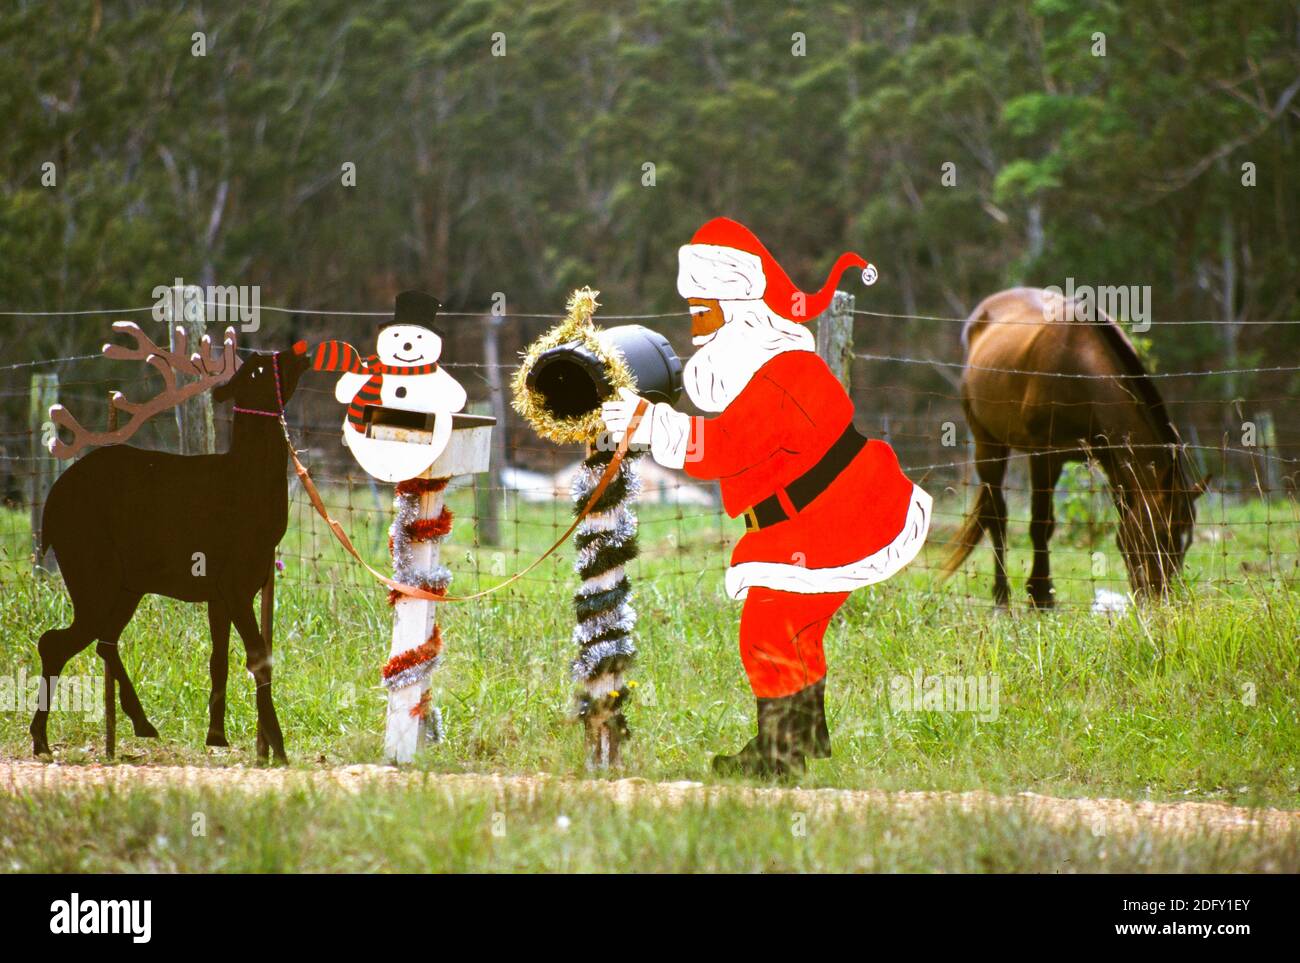 Christmas decorations mounted on a farm fence in rural Australia ...